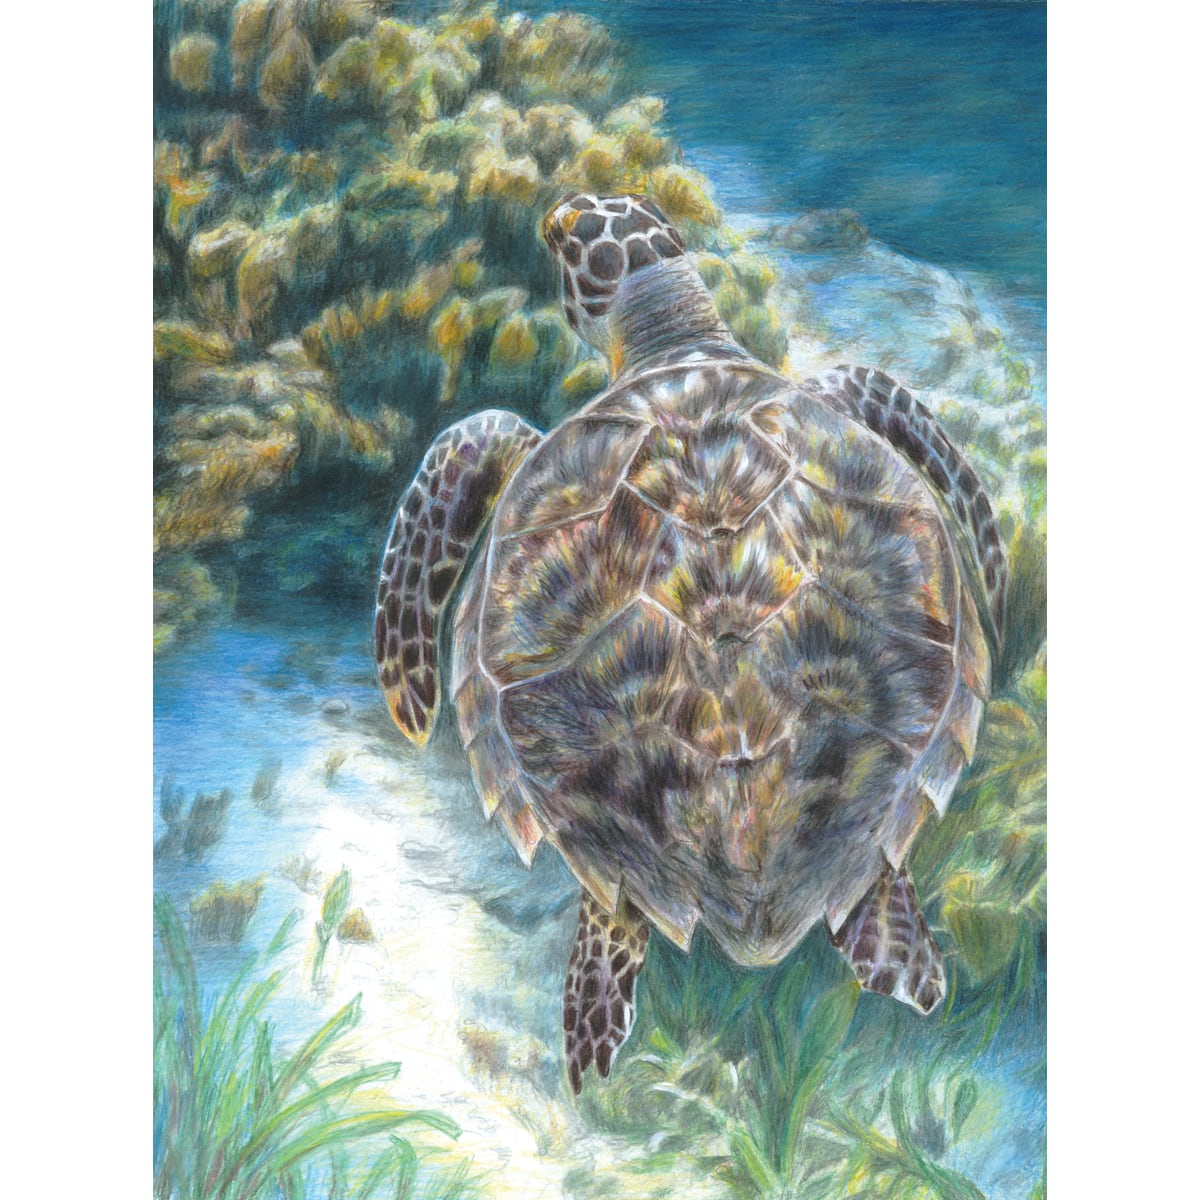 Royal &#x26; Langnickel&#xAE; Sea Turtle Colour Pencil&#x2122; by Numbers Kit